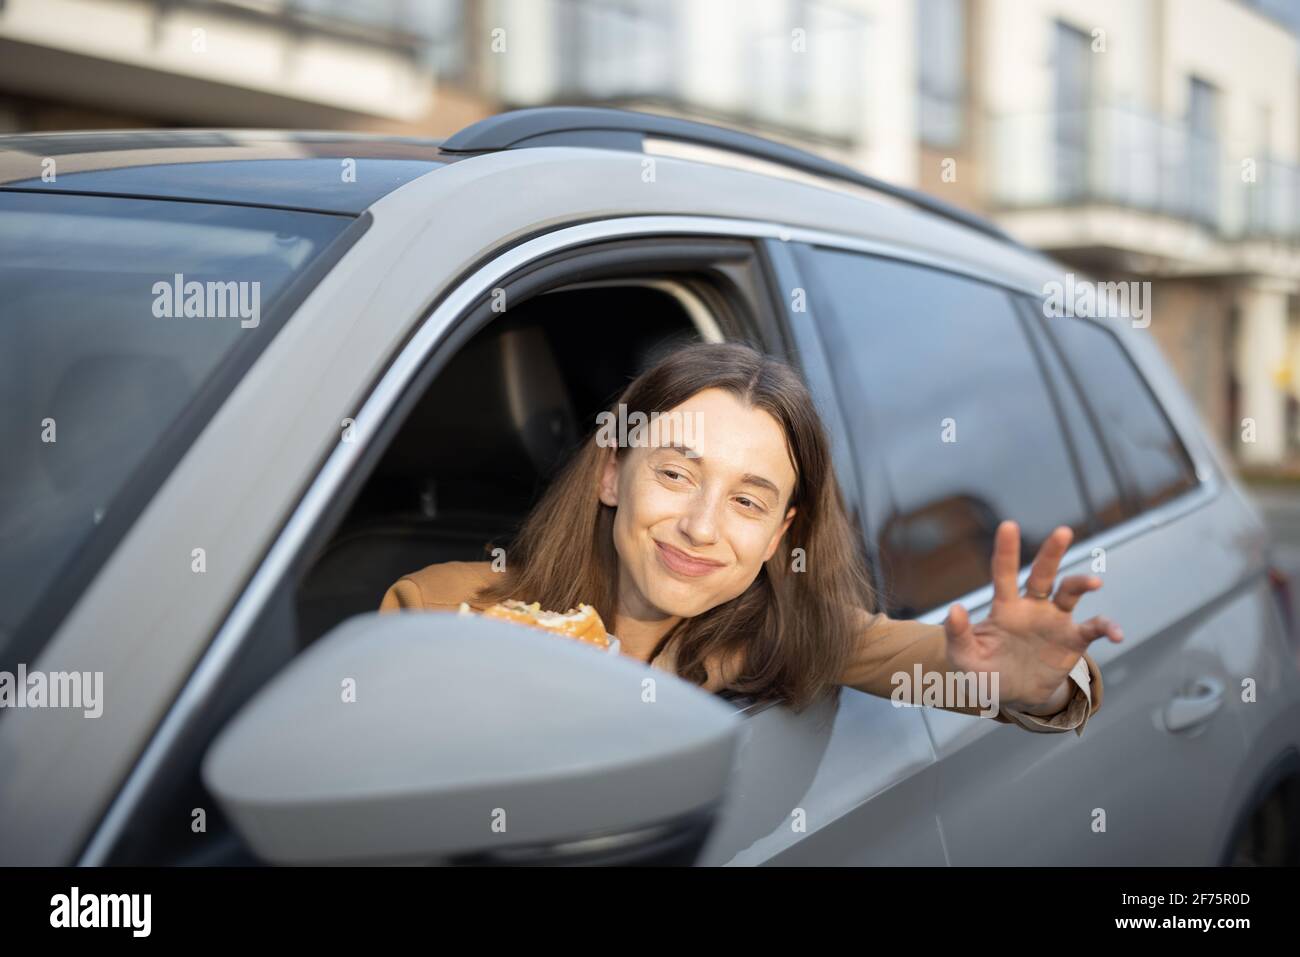 Happy woman eating a burger in the car while greet someone on the road. Have unhealthy fast food snack. Food to go. Hungry and busy concept. Stock Photo